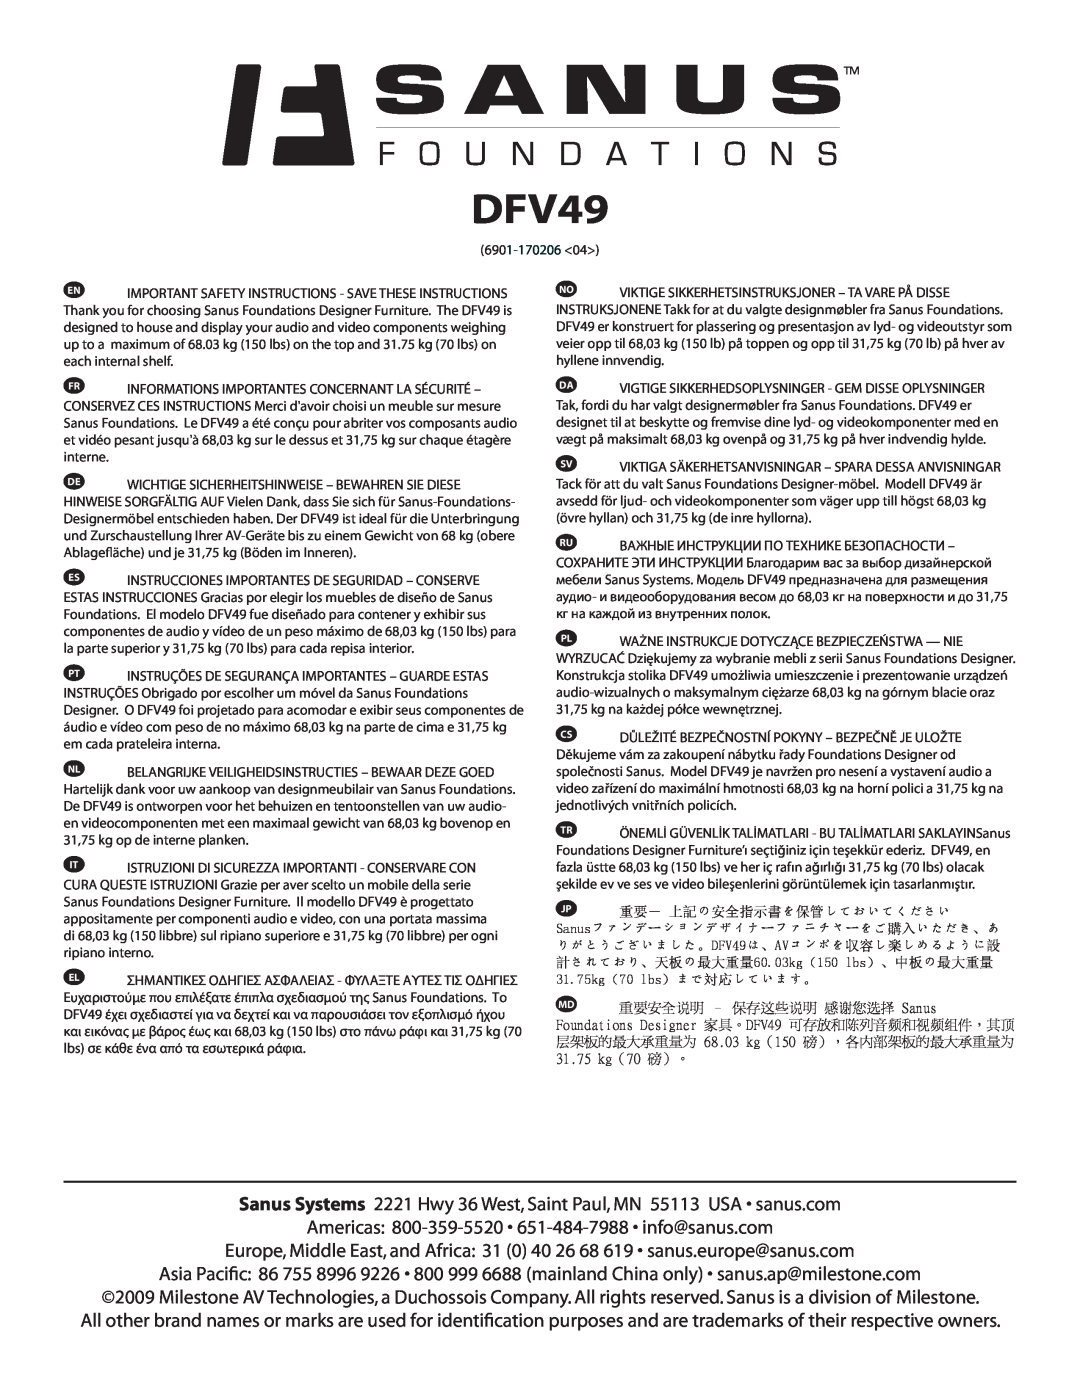 Sanus Systems DFV49 important safety instructions 